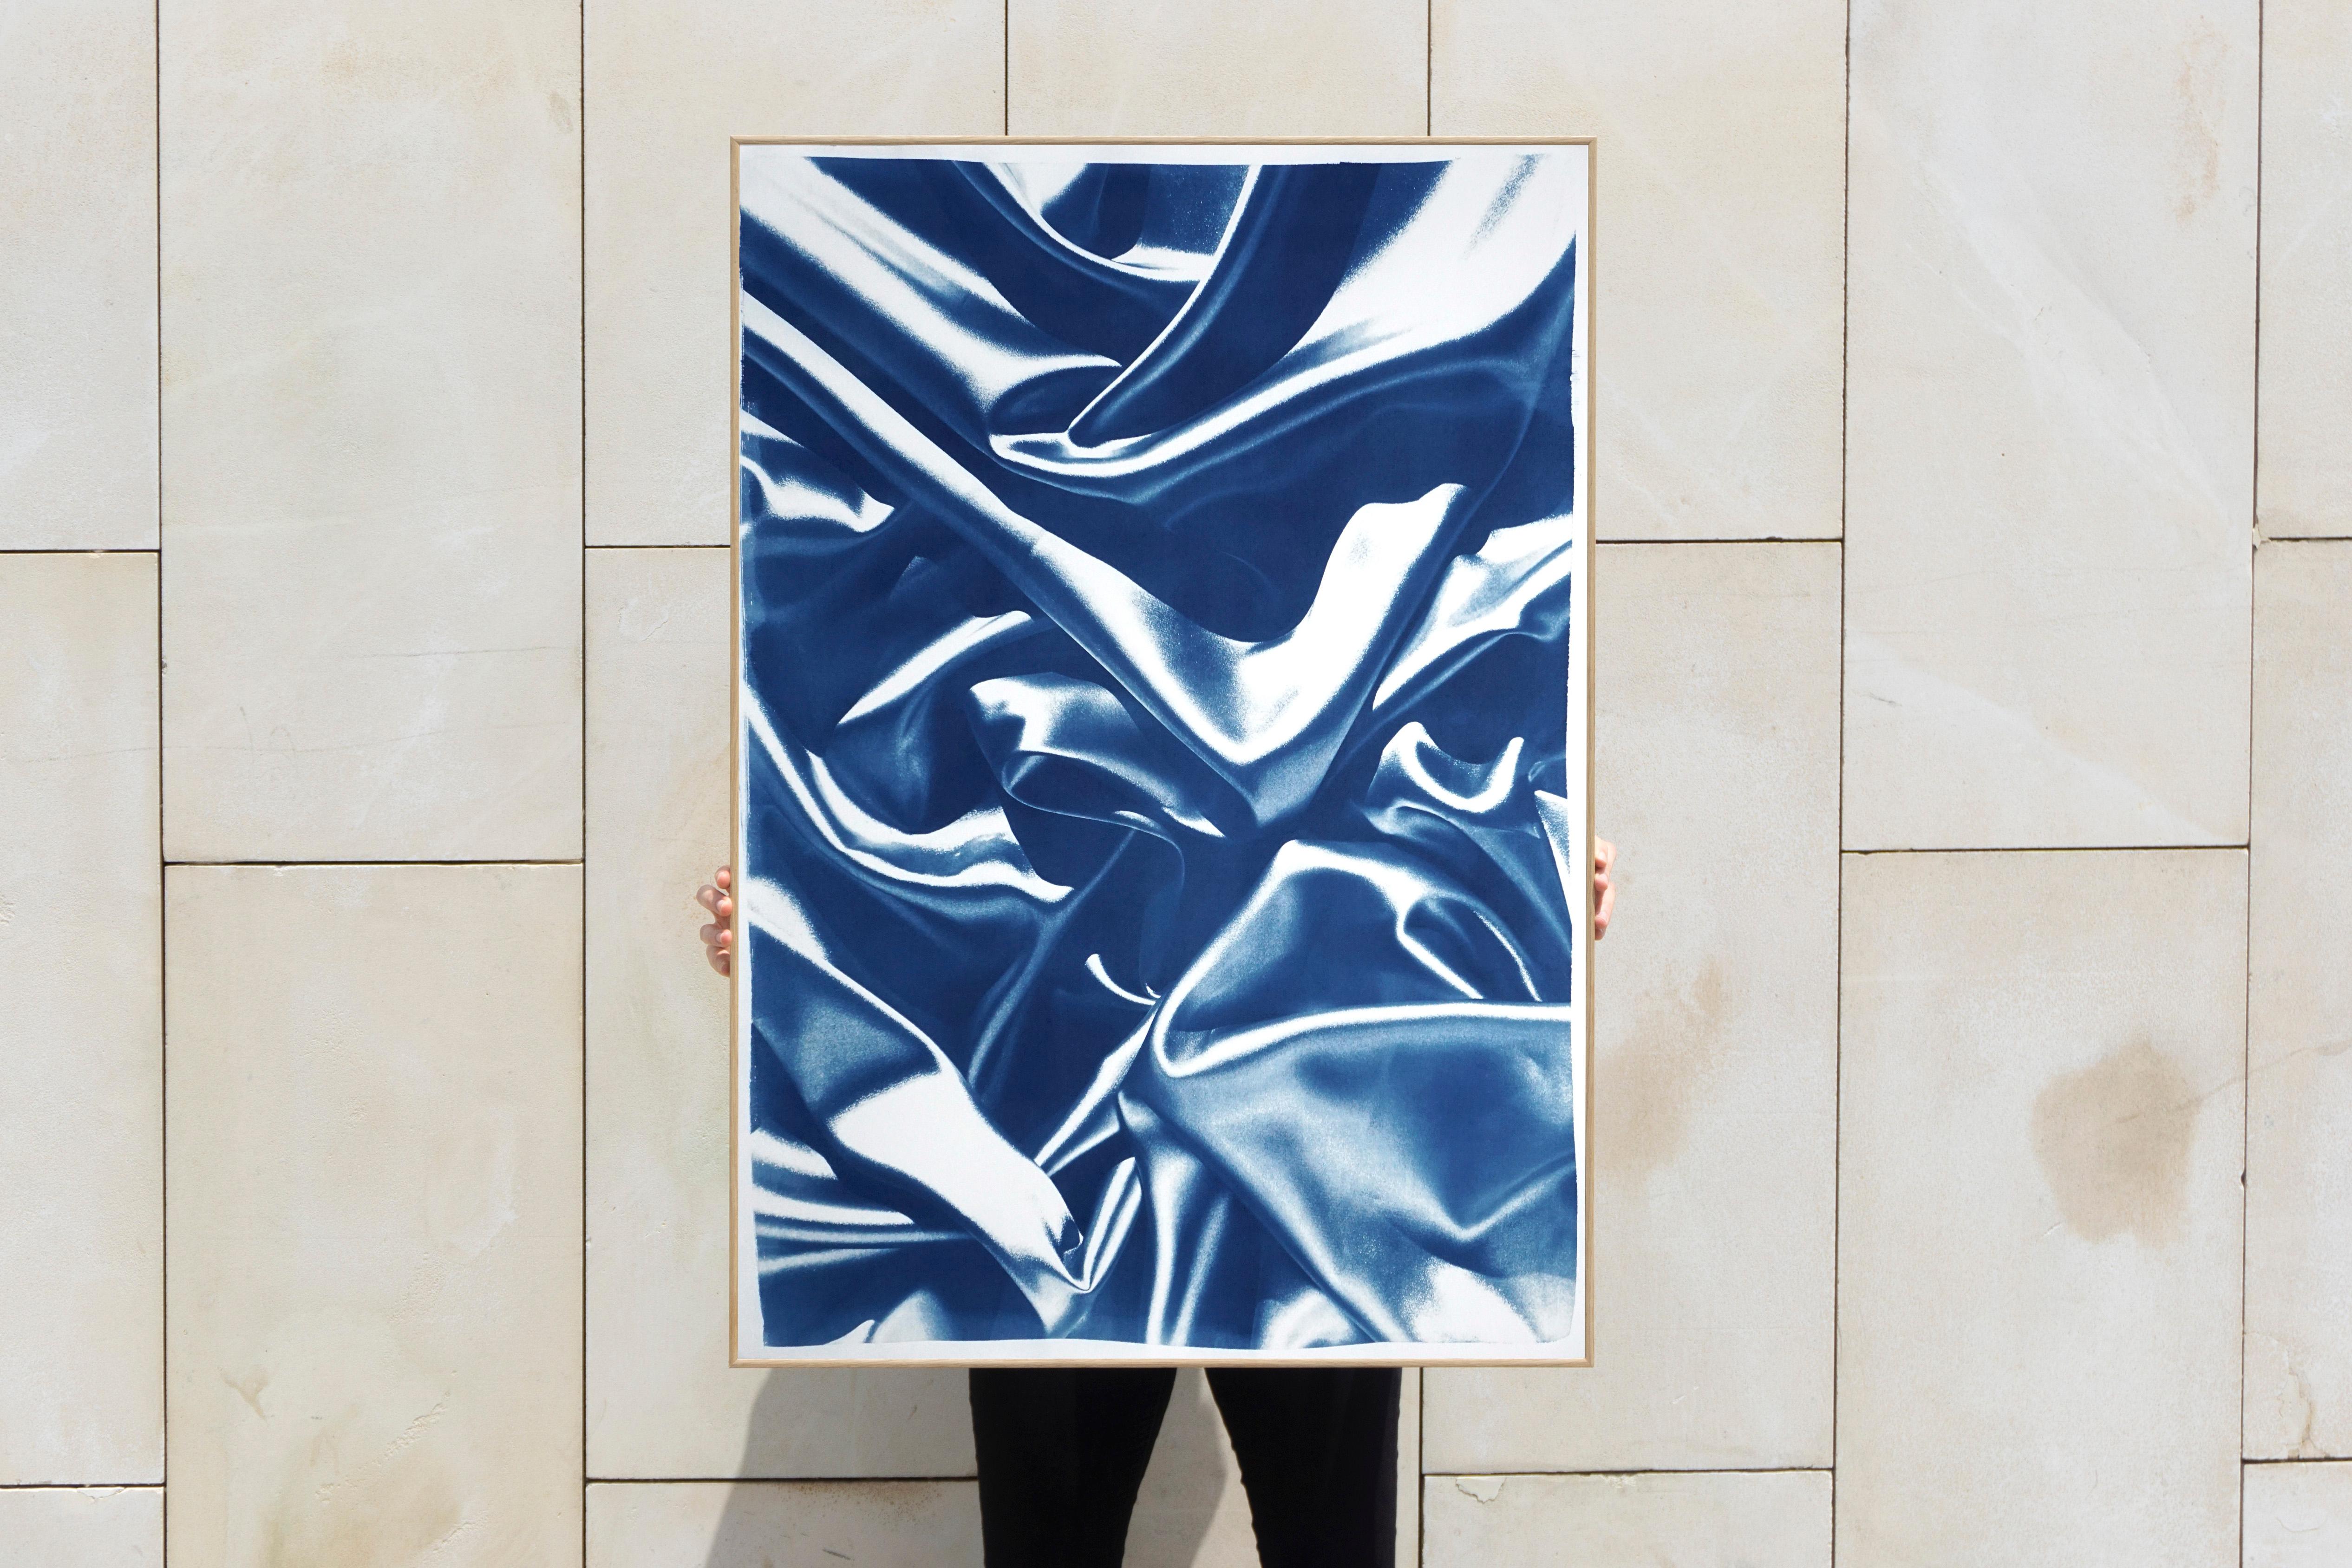 This is an exclusive handprinted limited edition cyanotype.

Details:
+ Title: Marble Blue Silk Pattern
+ Year: 2022
+ Edition Size: 50
+ Stamped and Certificate of Authenticity provided
+ Measurements : 70x100 cm (28x 40 in.), a standard frame